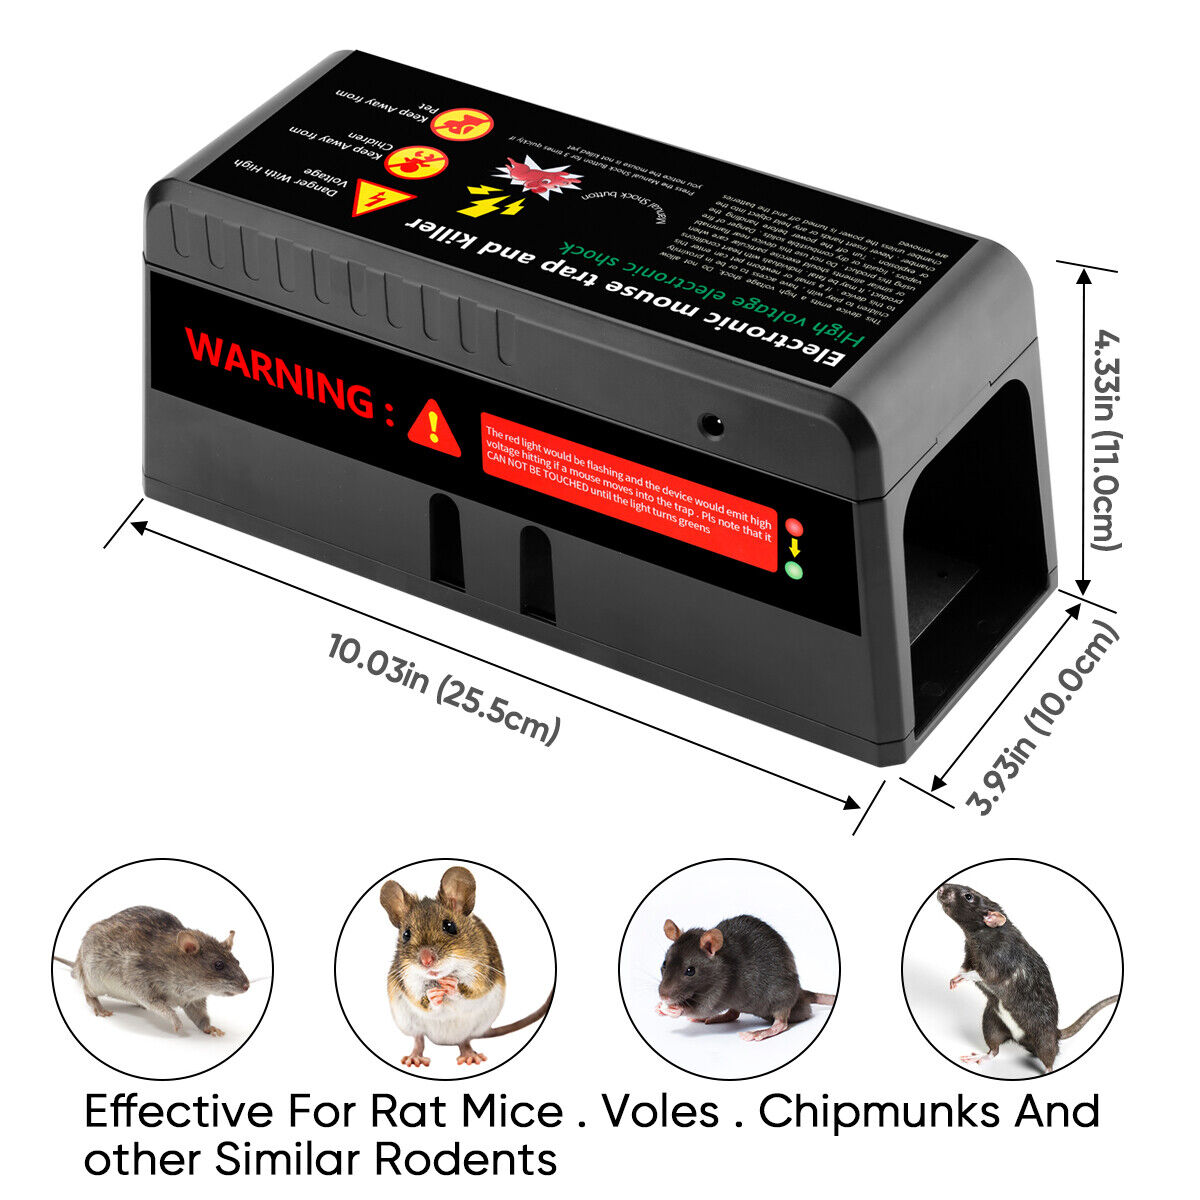 JahyShow Electric Rat Zapper Trap，2000V Shock for Effective Rat Catching -  Keep Your Home Rodent-Free 